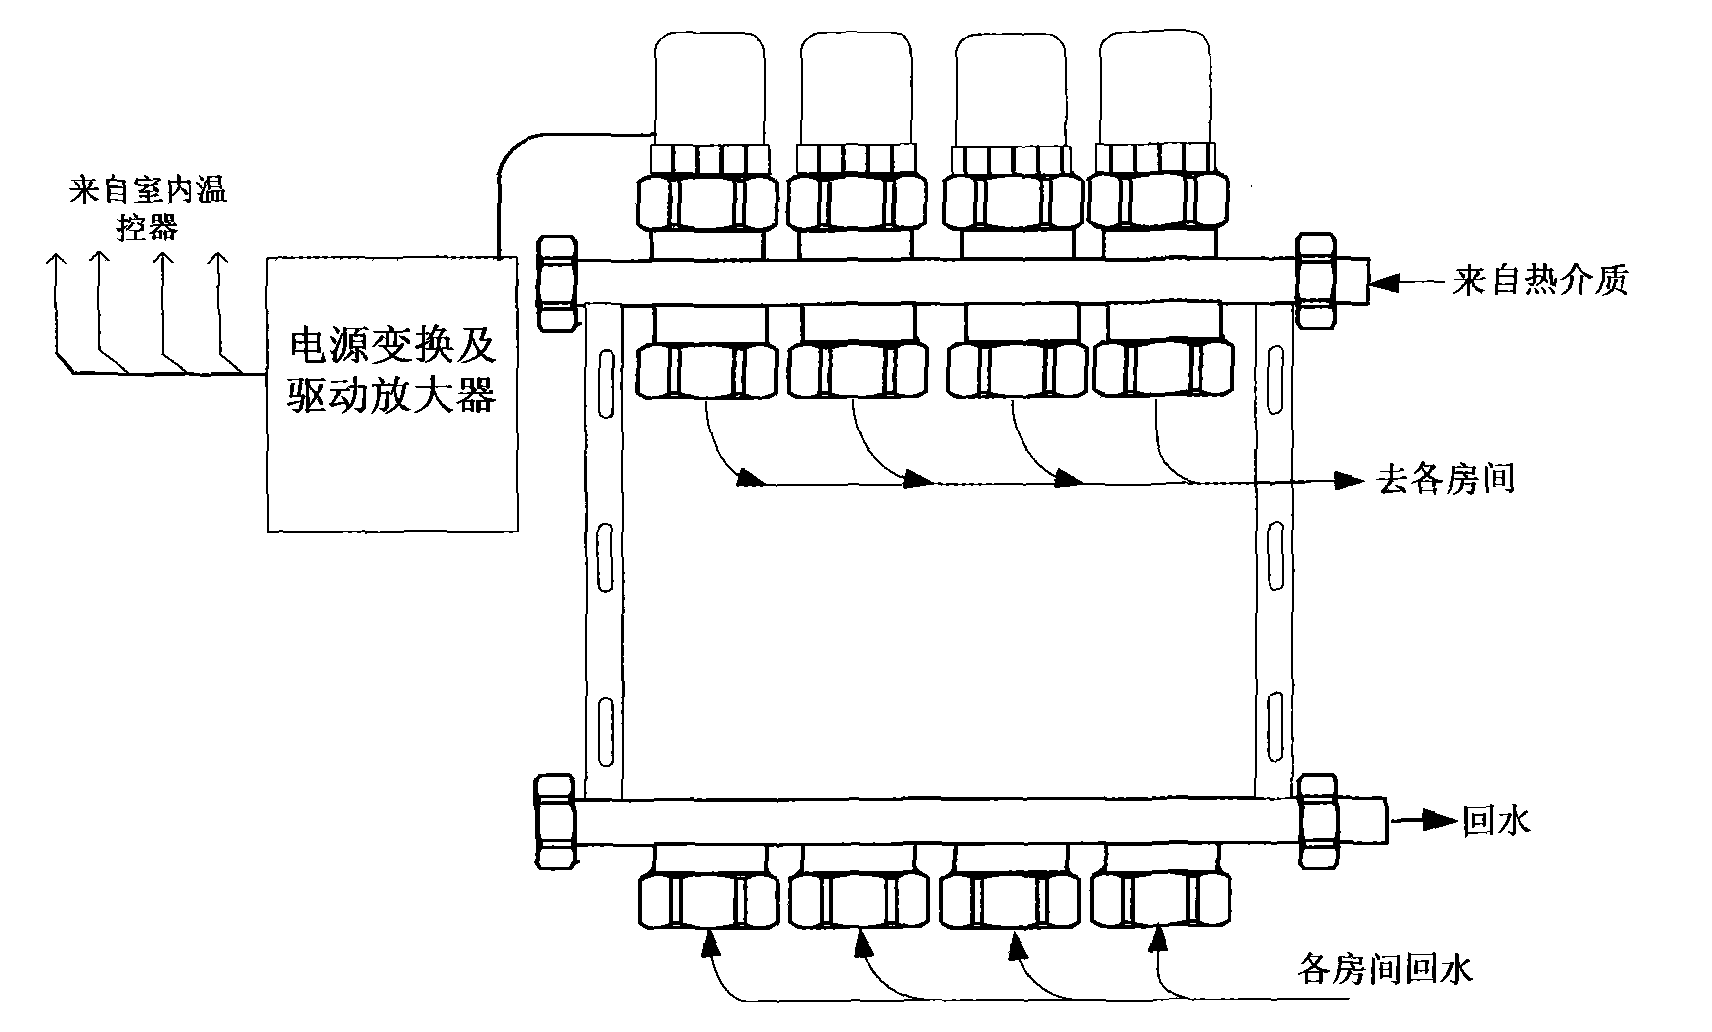 Water divider temperature control system with antifreezing function